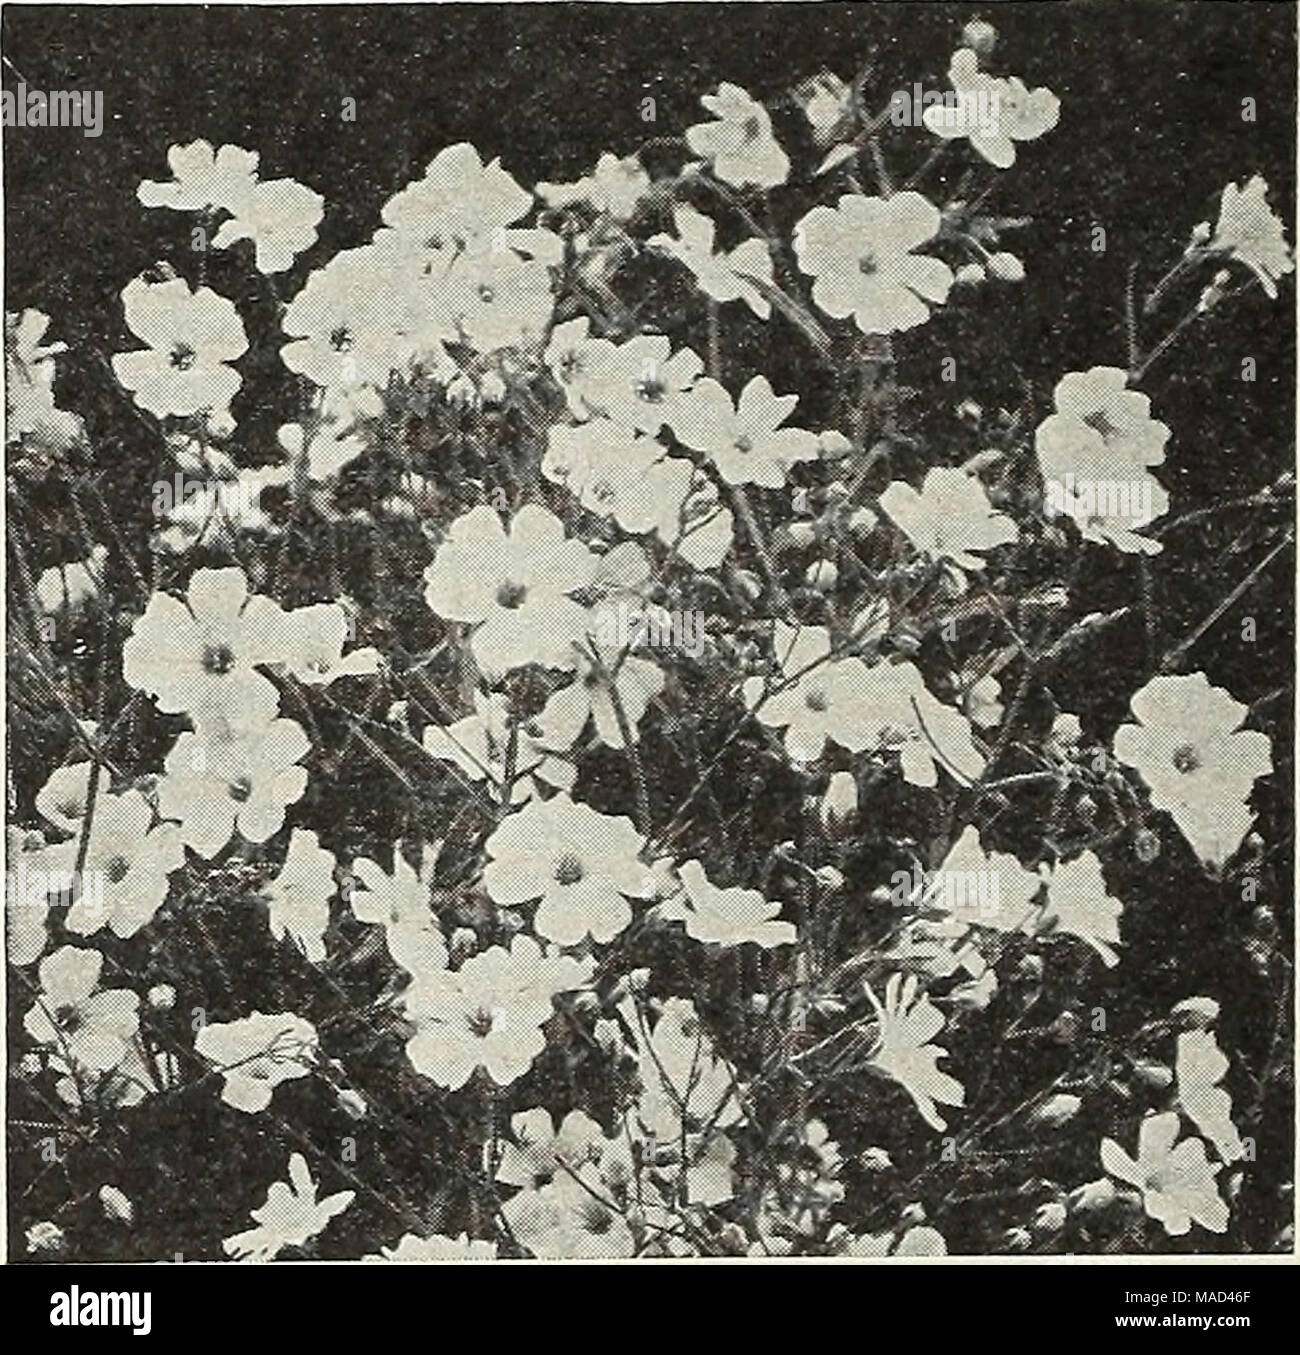 . Dreer's wholesale catalog for florists and market gardeners : 1943 winter - spring - summer . Gypsophila elegans alba grandiflora Gypsophila—Baby's Breath $£• 2539 Elegans alba grandiflora, Paris Market Strain, '/4 lb. 50c; lb. 1.50 2541 London Market Strain &quot;A lb. 50c; lb. $1.50 2540 Covent Garden Reselected 'A lb. 60c; lb. $2.00 2543 Carmine $0.15 2545 Rosea 15 Helianthus—Sunflower 2577 Cucumerifolius grandiflorus, Stella 15 2580 New Miniature Mixed 'A lb. 75c .10 2582 Double Sungold. Golden yellow 15 2581 Chrysanthemum-Flowered. Double yellow 10 2585 Red Hybrids. Red and brown tones  Stock Photo